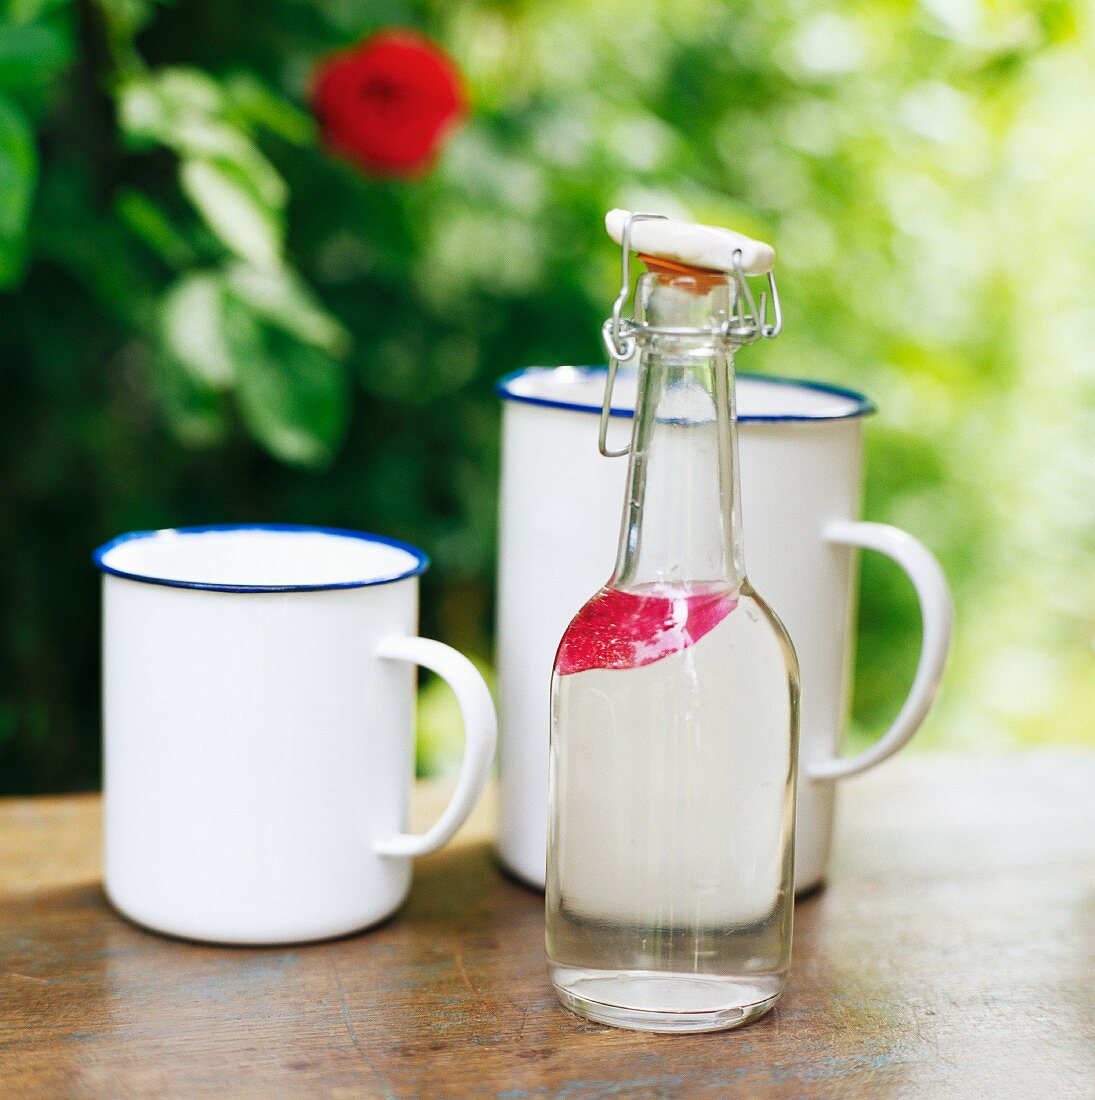 A bottle of water and enamel mugs